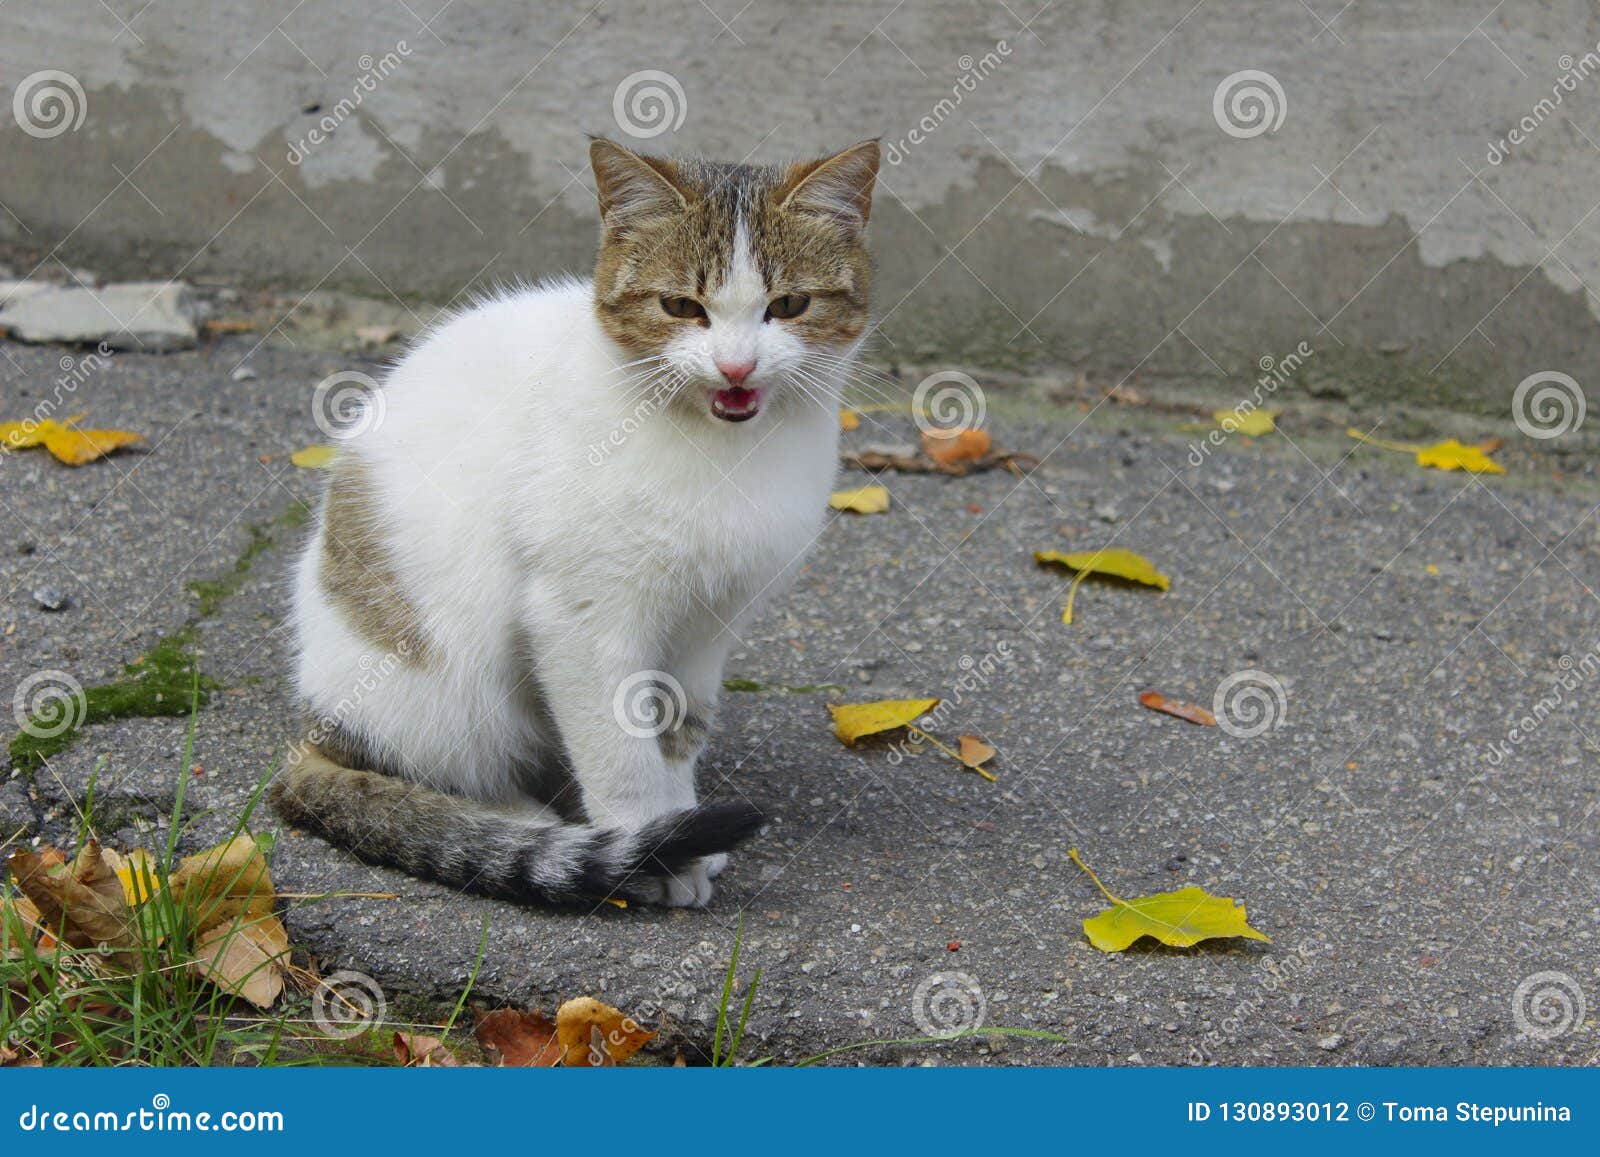 Sad Stray Cat. Cute Cat on the Road Stock Photo - Image of pets, concept:  130893012